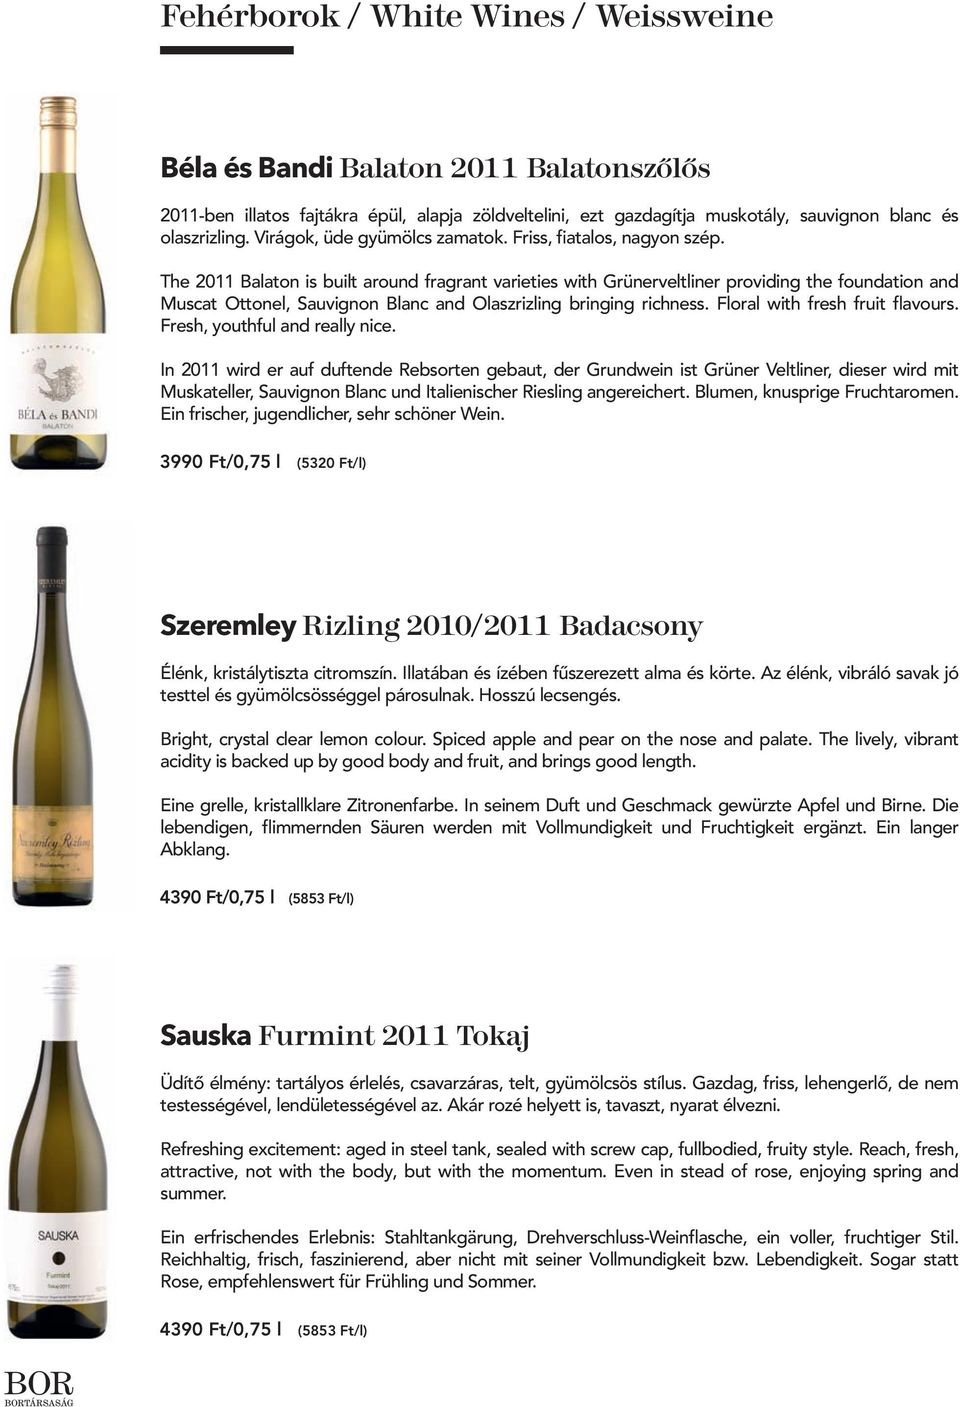 The 2011 Balaton is built around fragrant varieties with Grünerveltliner providing the foundation and Muscat Ottonel, Sauvignon Blanc and Olaszrizling bringing richness.